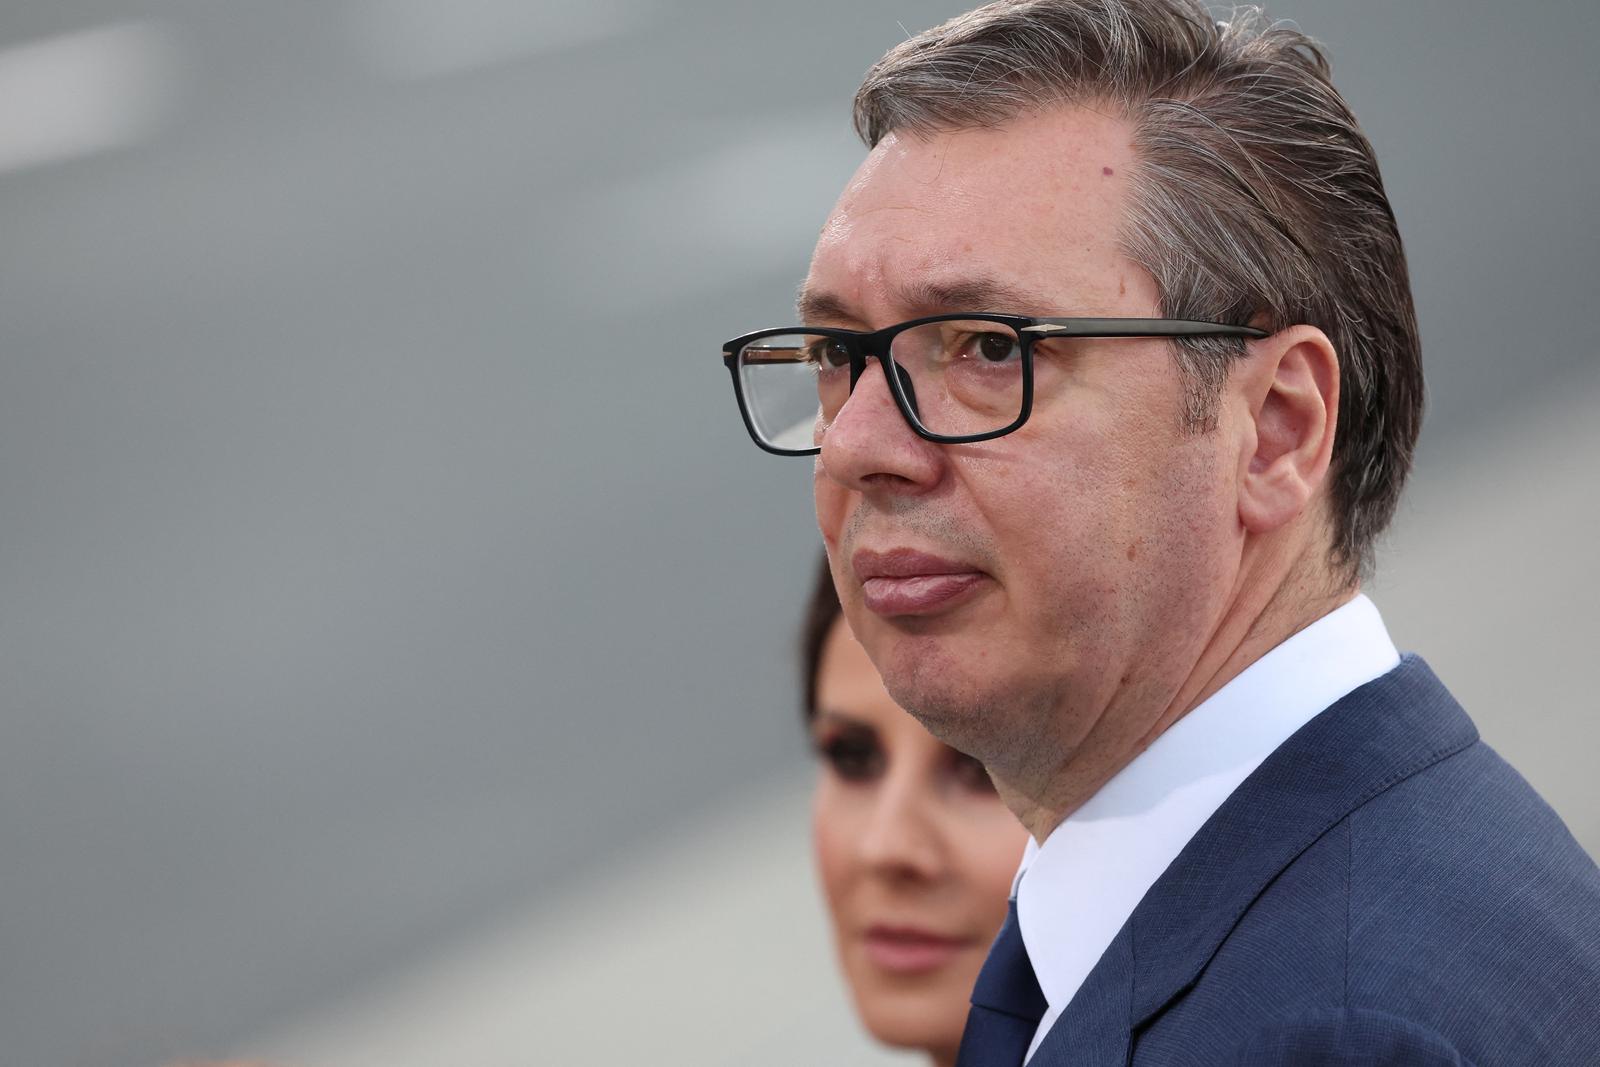 Serbian President Aleksandar Vucic and his wife Tamara Vucic, look on ahead of the departure of Chinese President Xi Jinping following a two-day state visit, at Nikola Tesla Airport in Belgrade, Serbia, May 8, 2024. REUTERS/Marko Djurica Photo: MARKO DJURICA/REUTERS